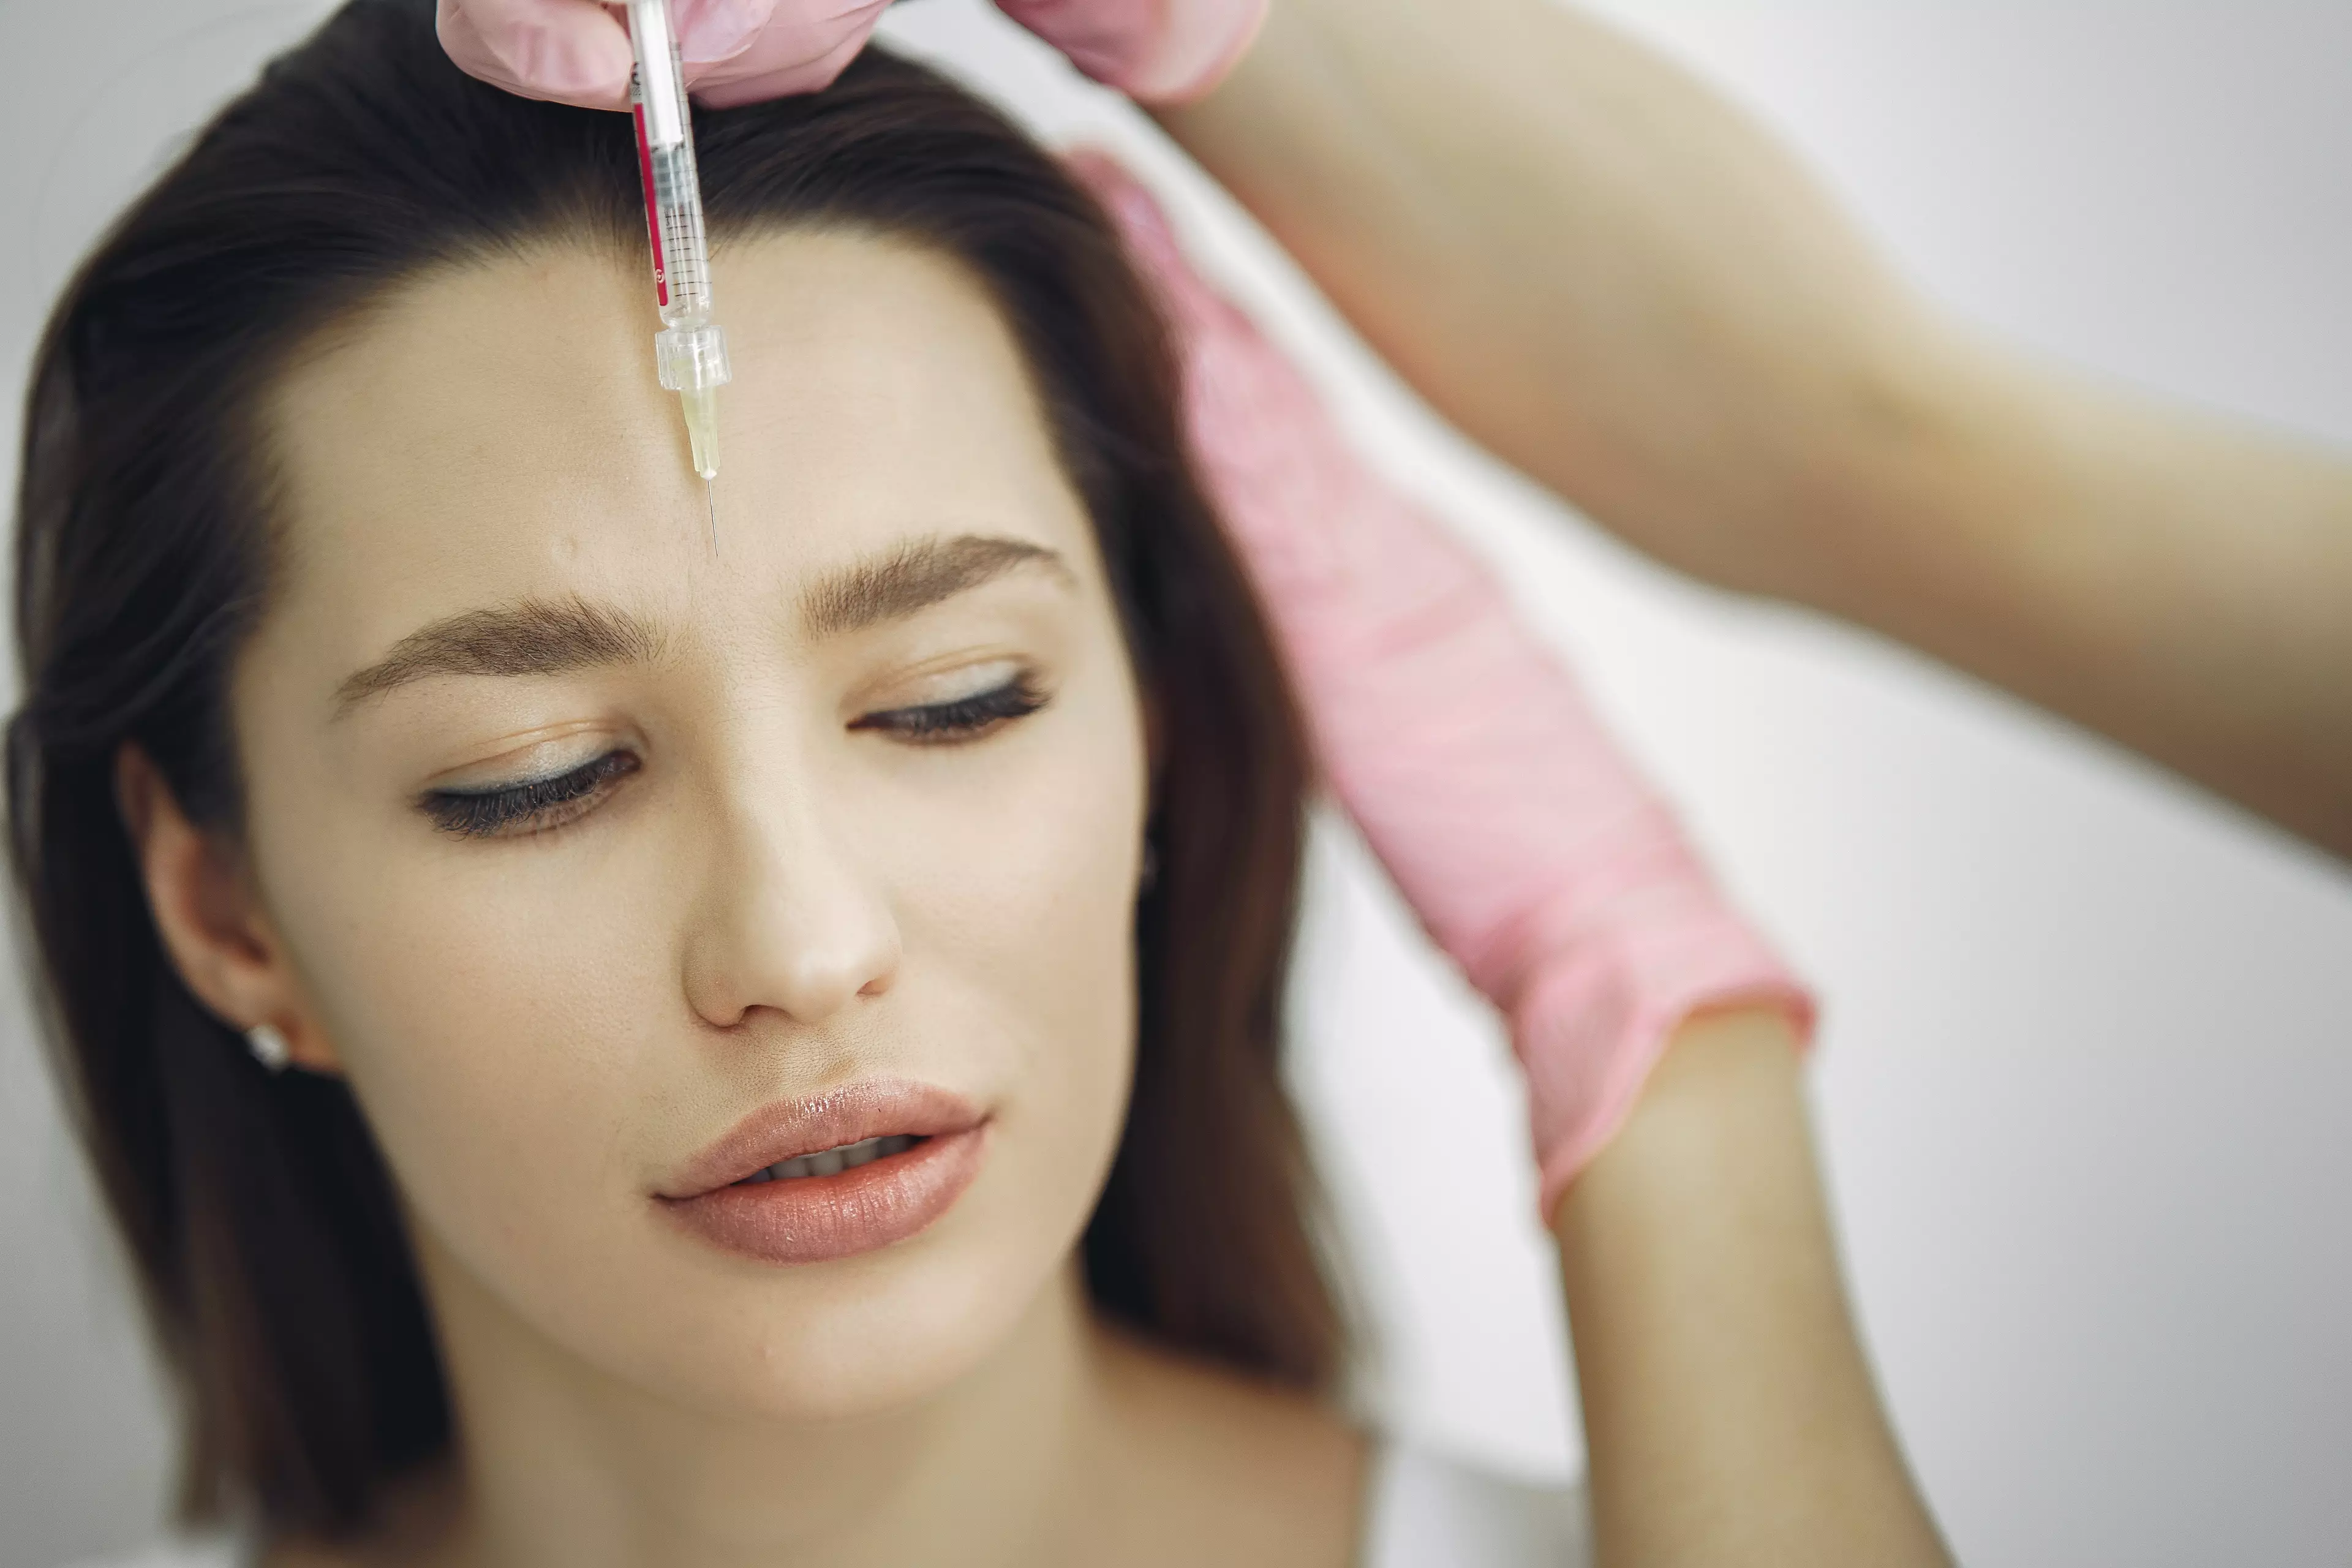 Now, people are using for fillers for a more natural look (